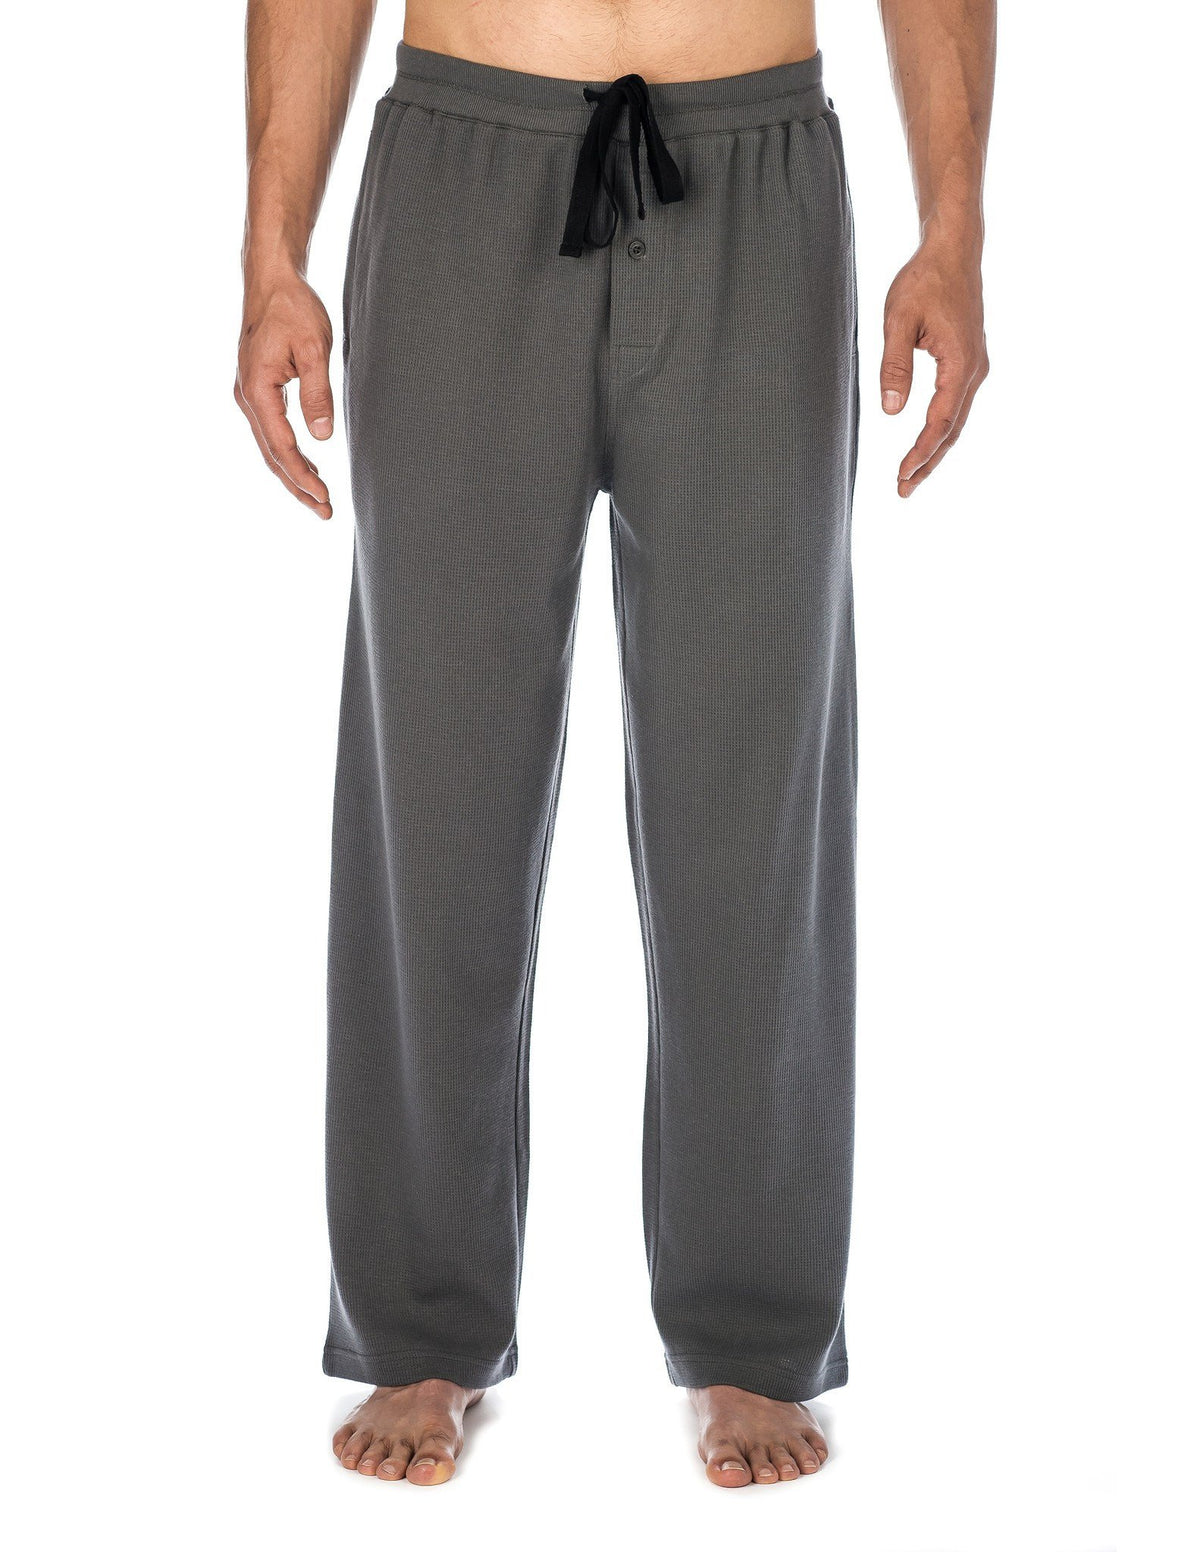 Men's Waffle Knit Thermal Lounge Pant - Charcoal